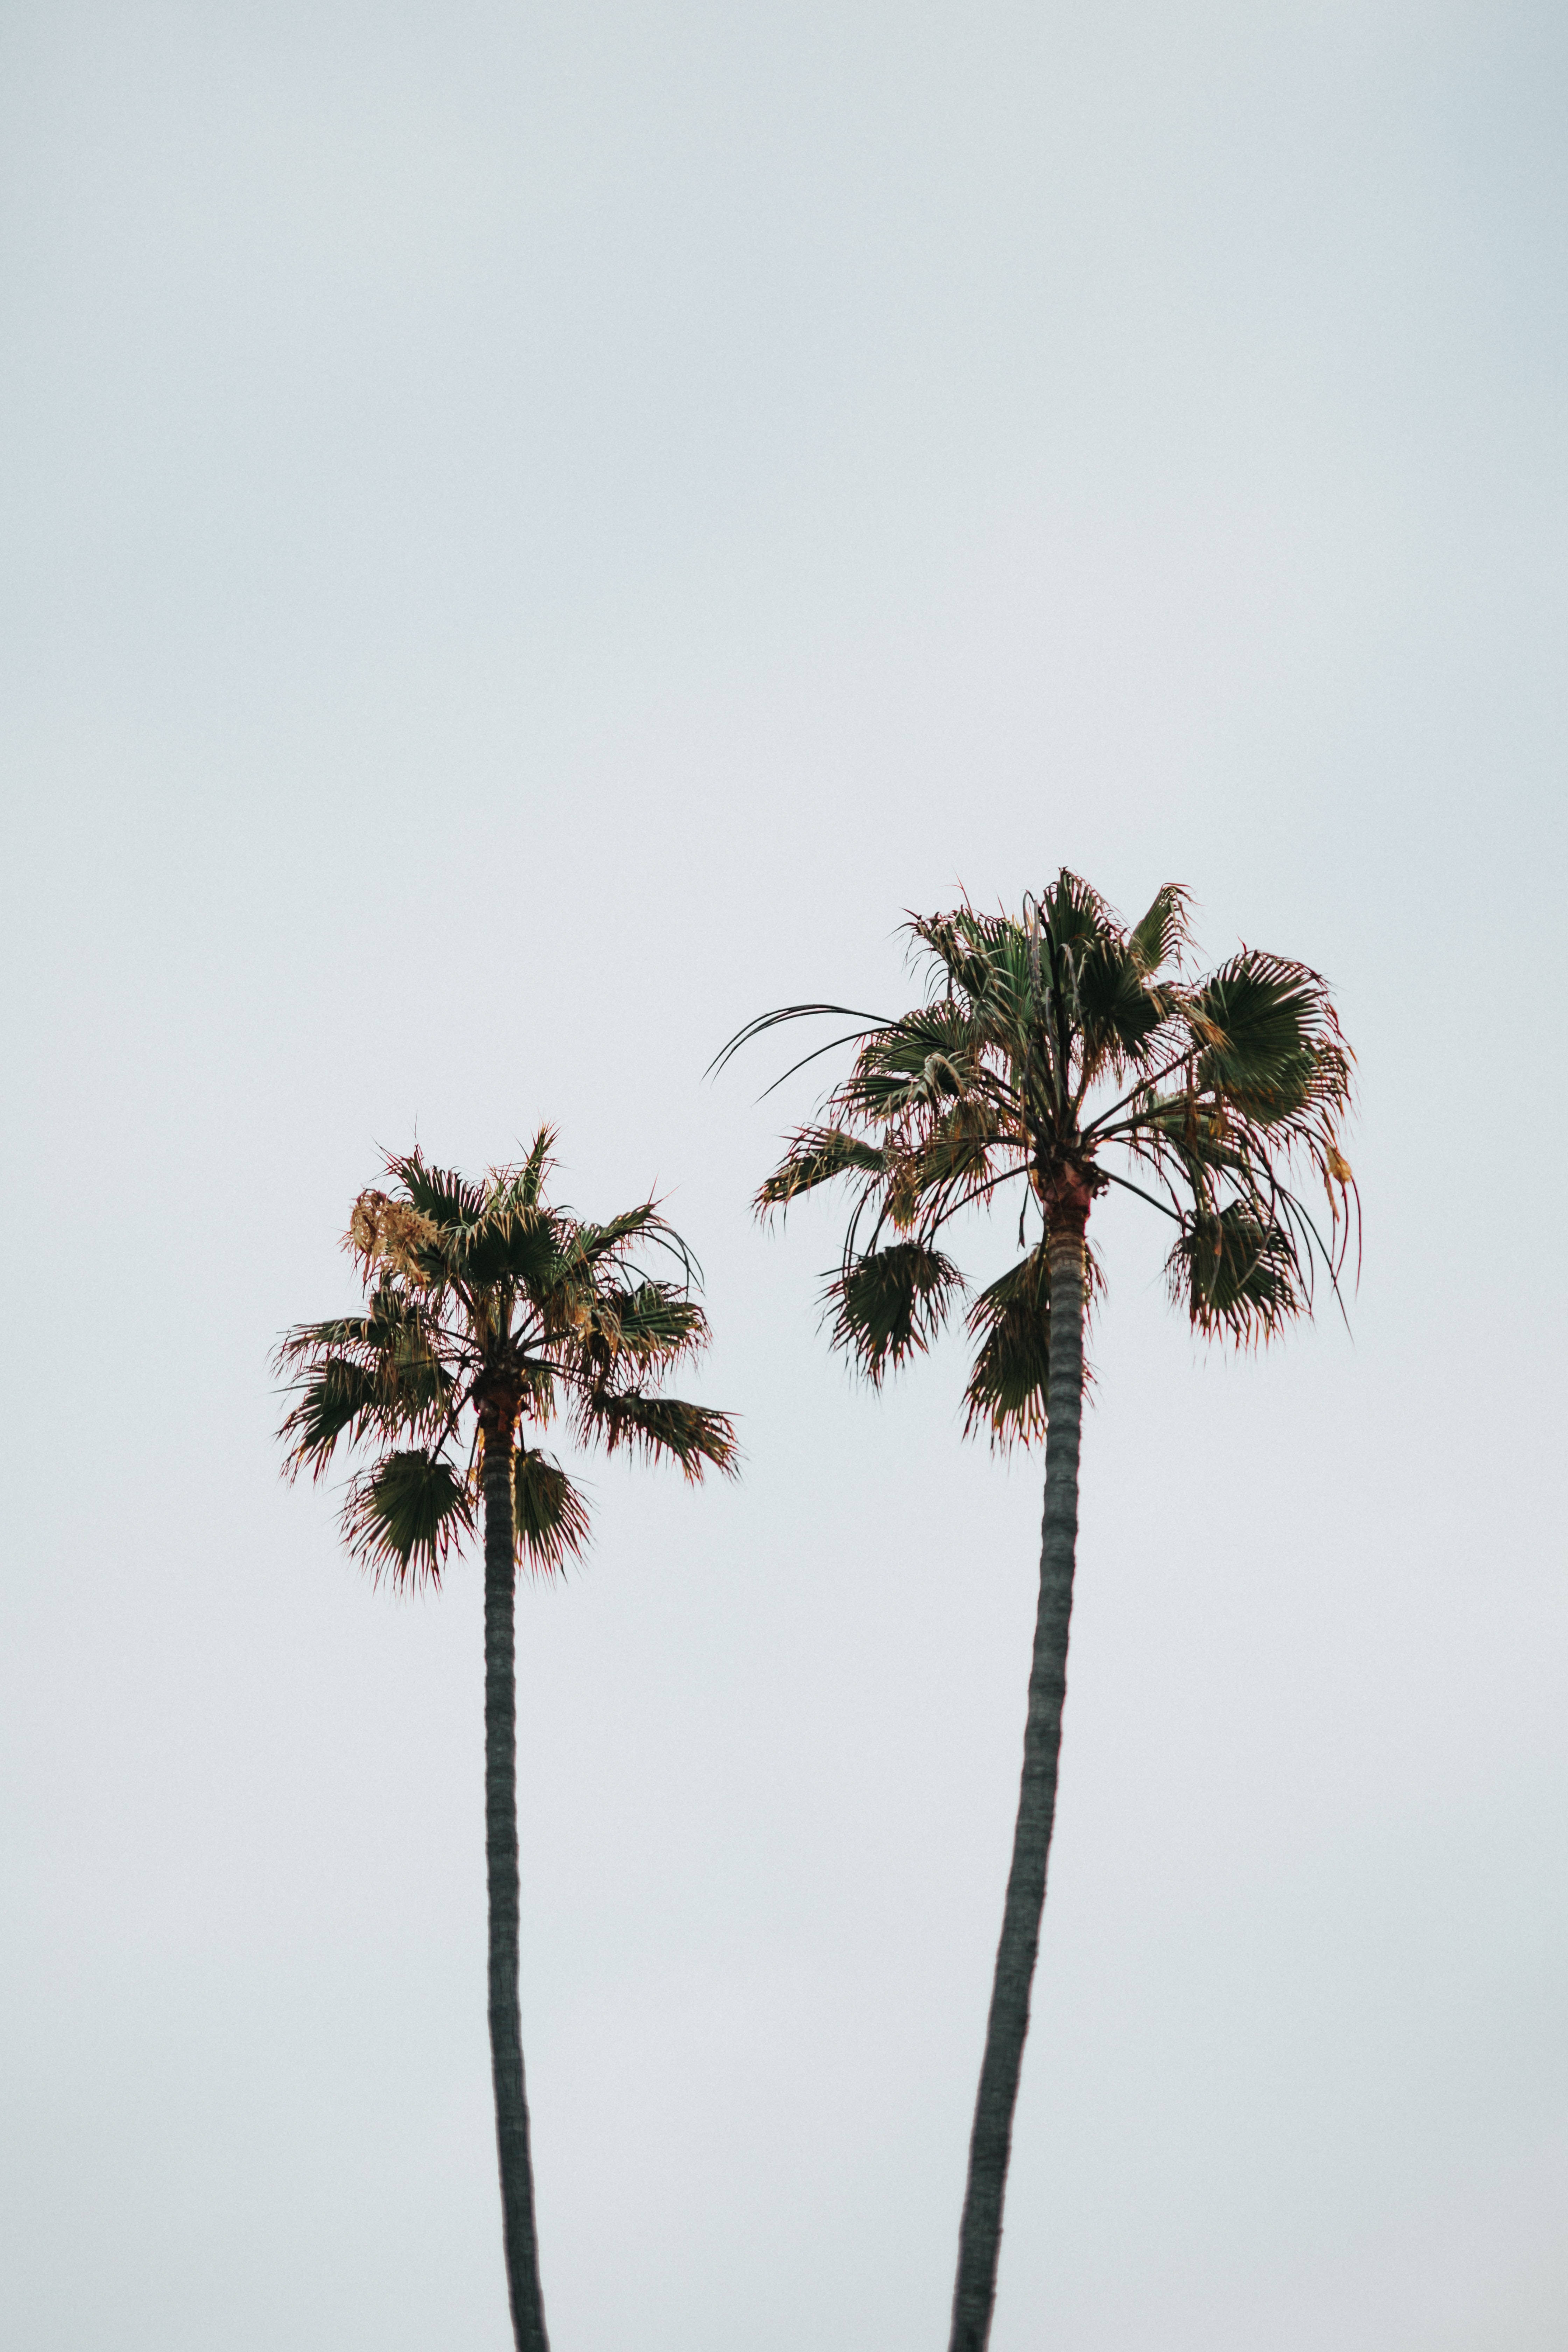 A pair of palm trees against a pale sky. - Palm tree